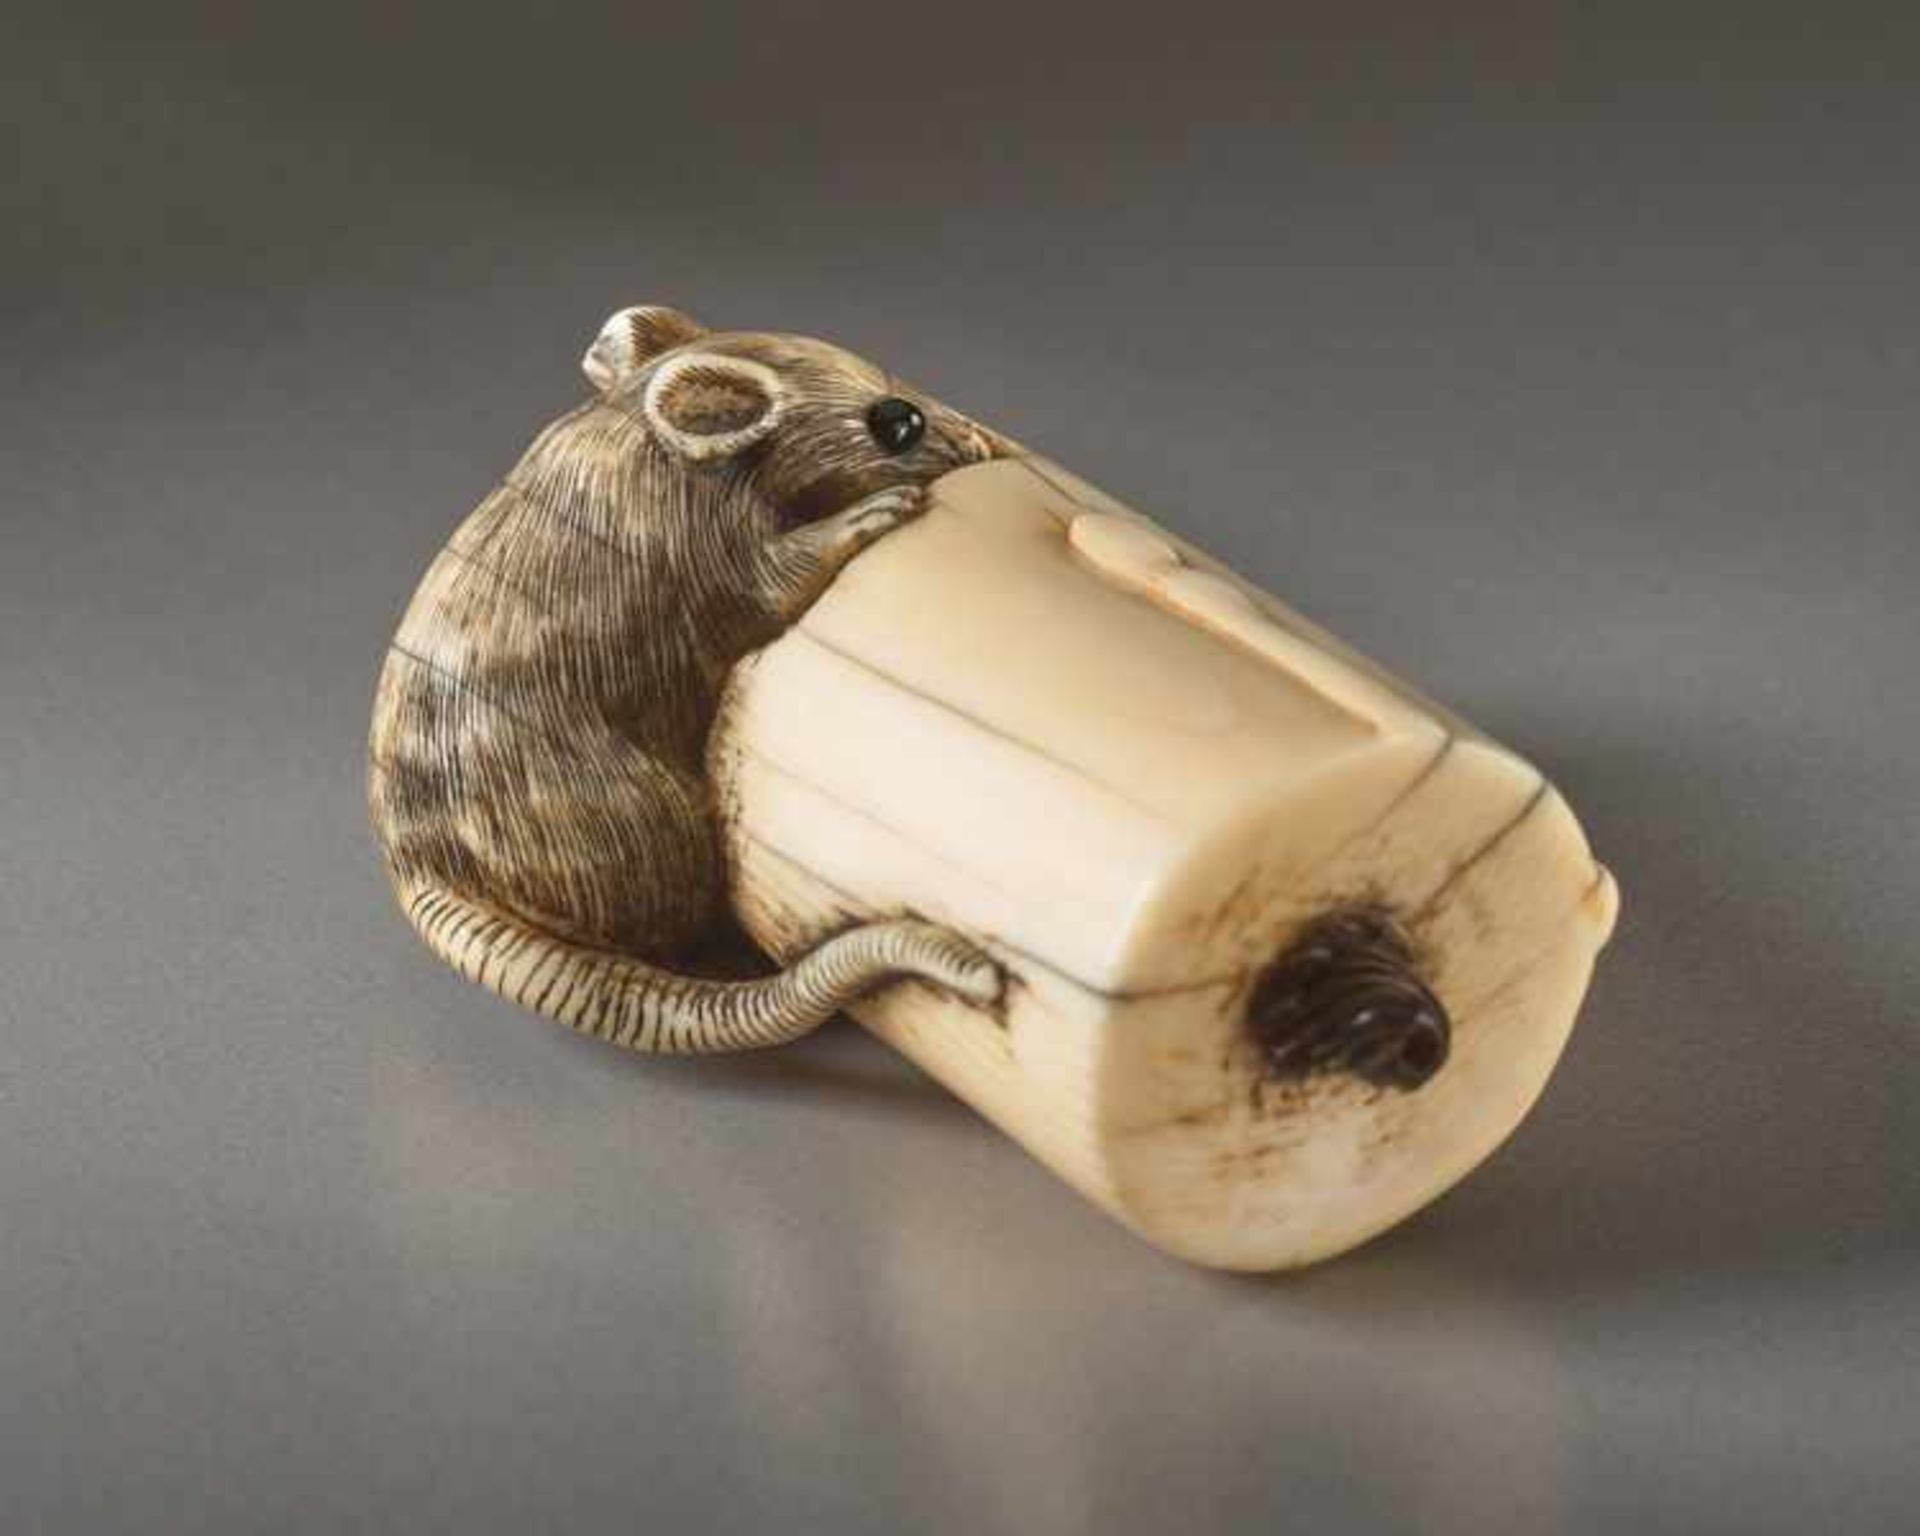 AN IVORY NETSUKE OF A RAT AND CANDLE Ivory netsuke. Japan, 18th or early 19th centuryThe rat, or - Image 3 of 4